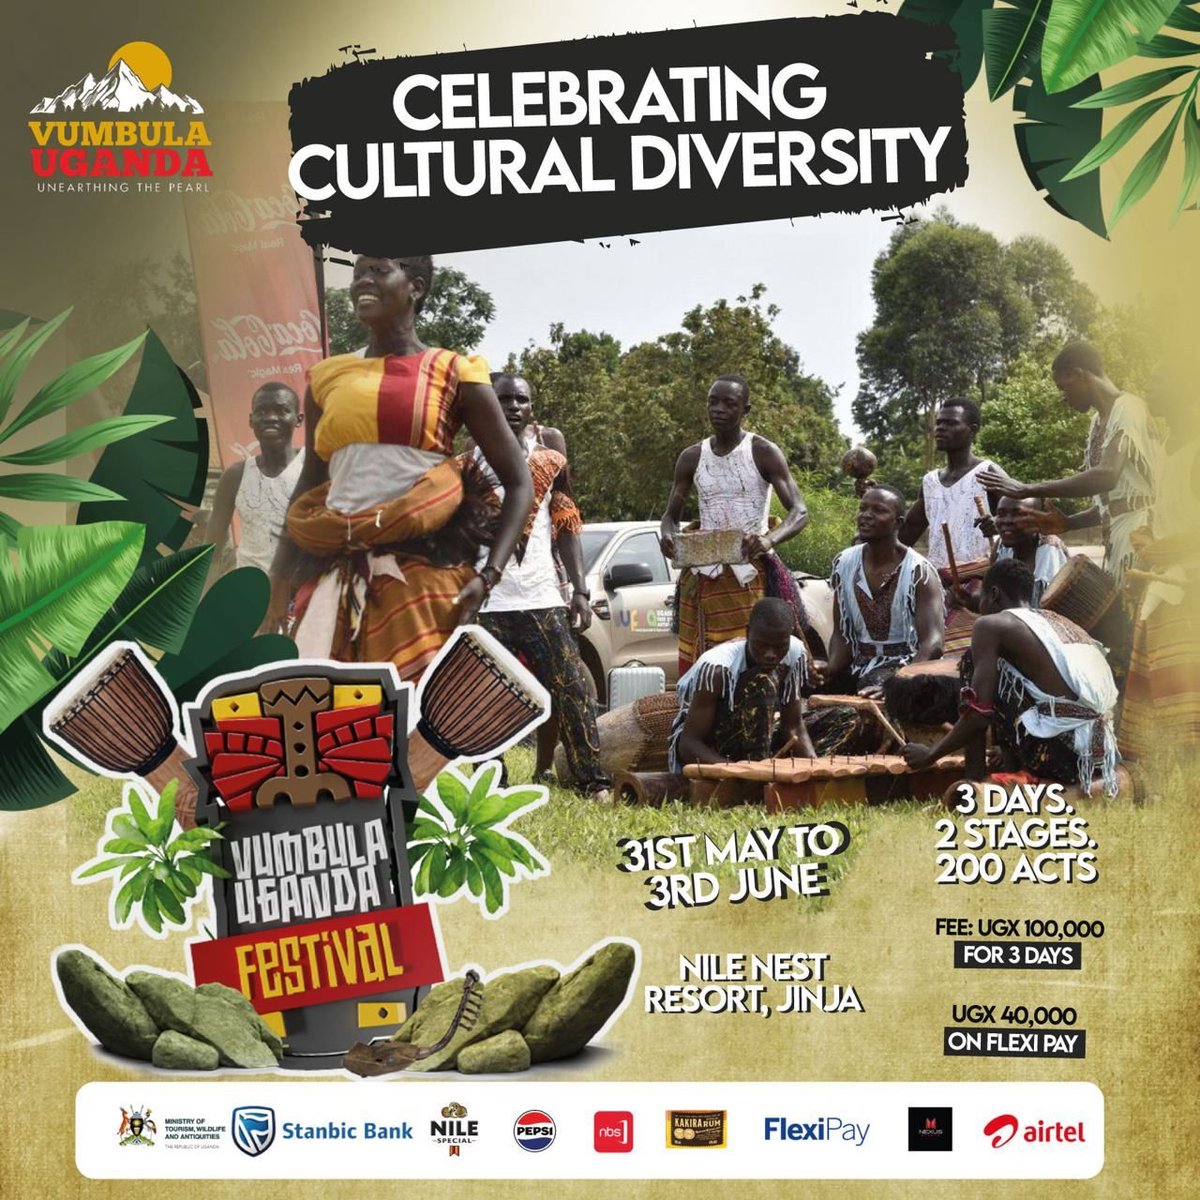 Join us in celebrating the rich tapestry of cultures at #VumbulaUgandaFestival, happening from May 31st to June 3rd at Nile Nest Resort Jinja. Explore, experience, and embrace diversity! @Vumbula_Uganda #GreeningTheNile #SanyukaUpdates